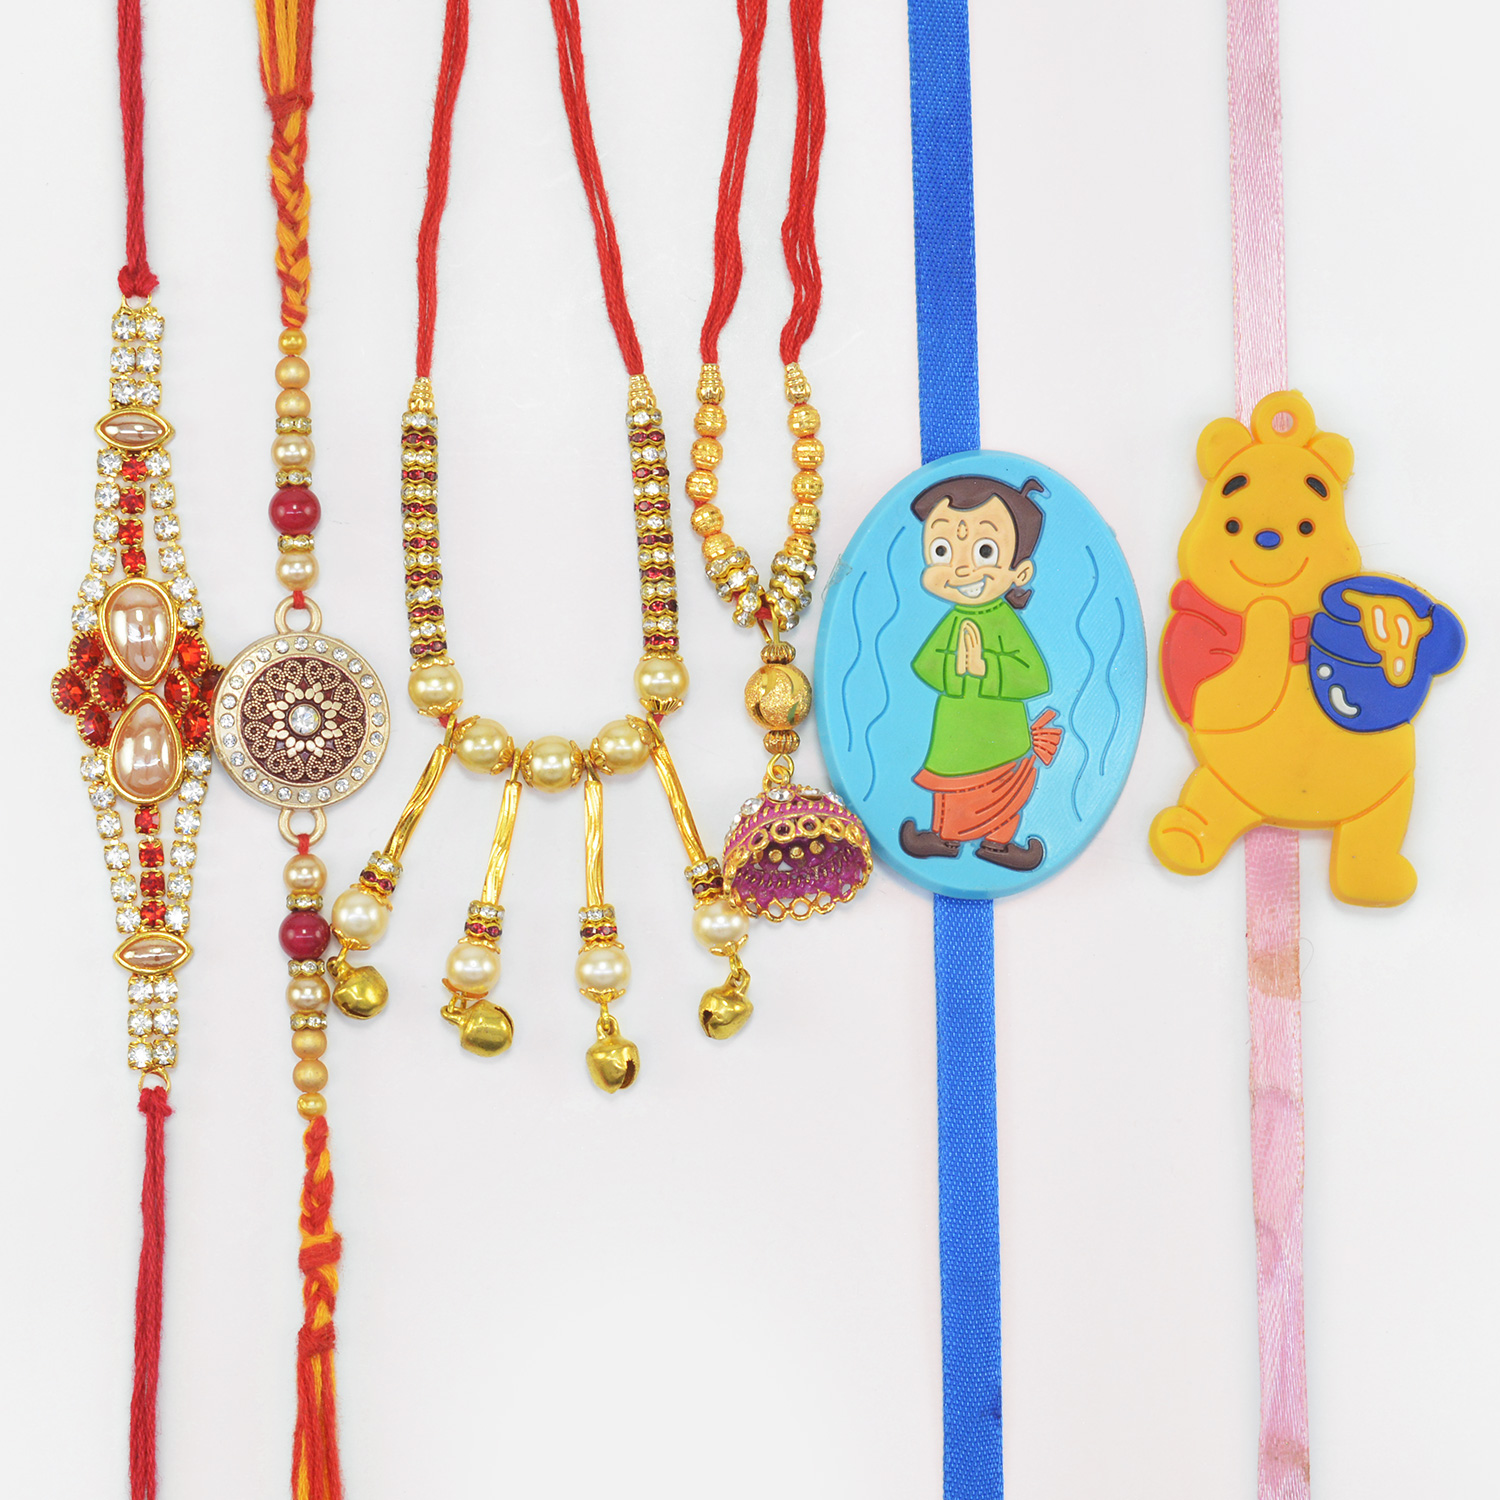 Buy or send Pearl and Jewel Studded Brother Rakhis with 2 Lumba Rakhis and  Cartoon Kids Rakhi of Bheem and Pooh Character Online